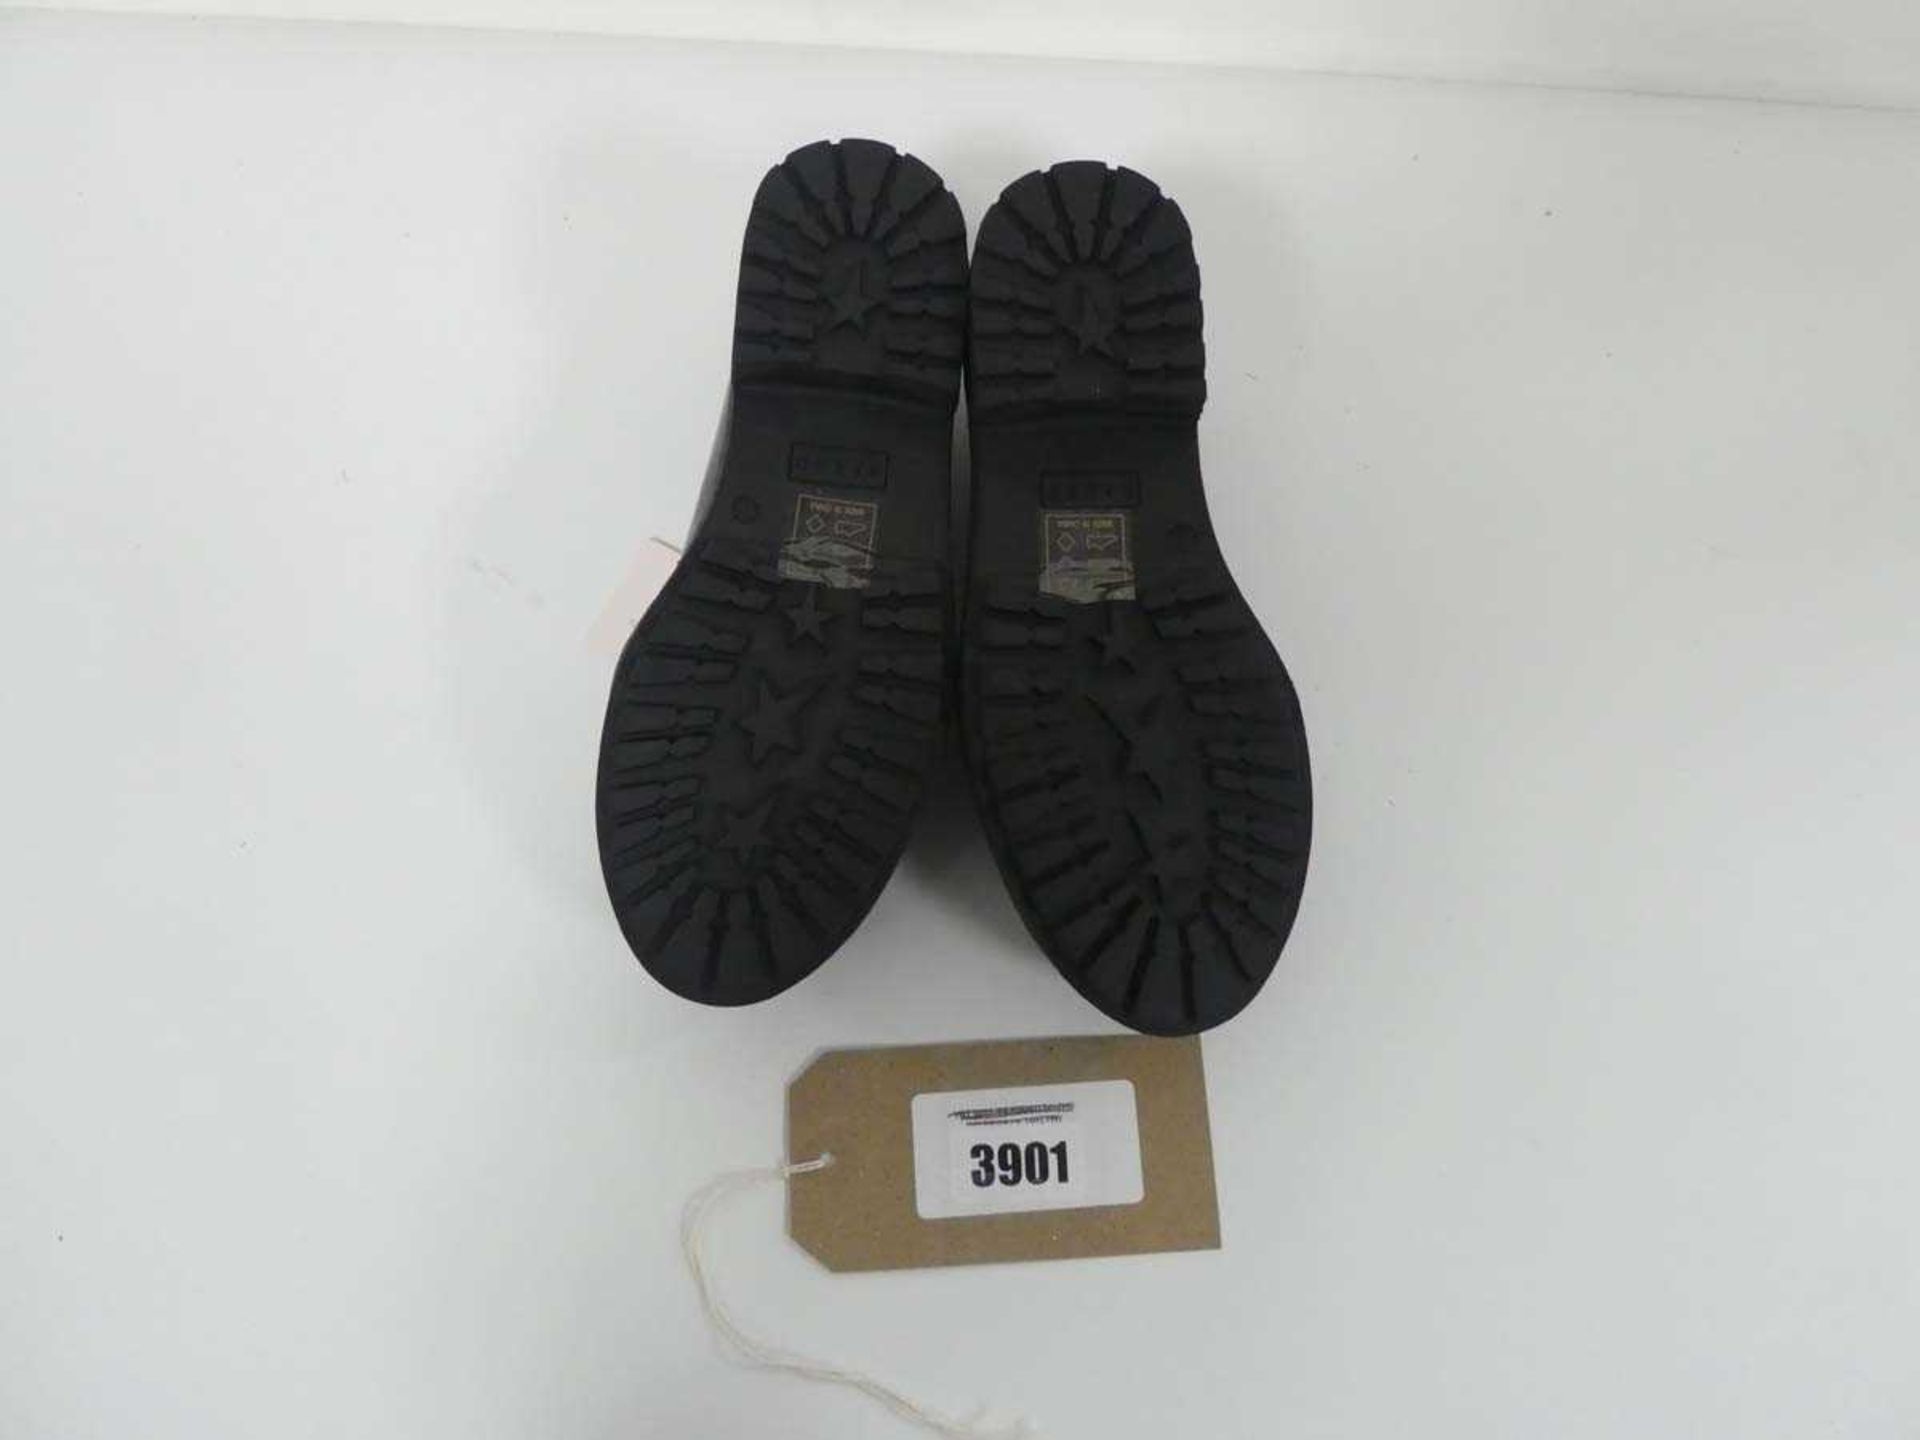 Children's Ted Baker shoes in black size UK2 - Image 3 of 3